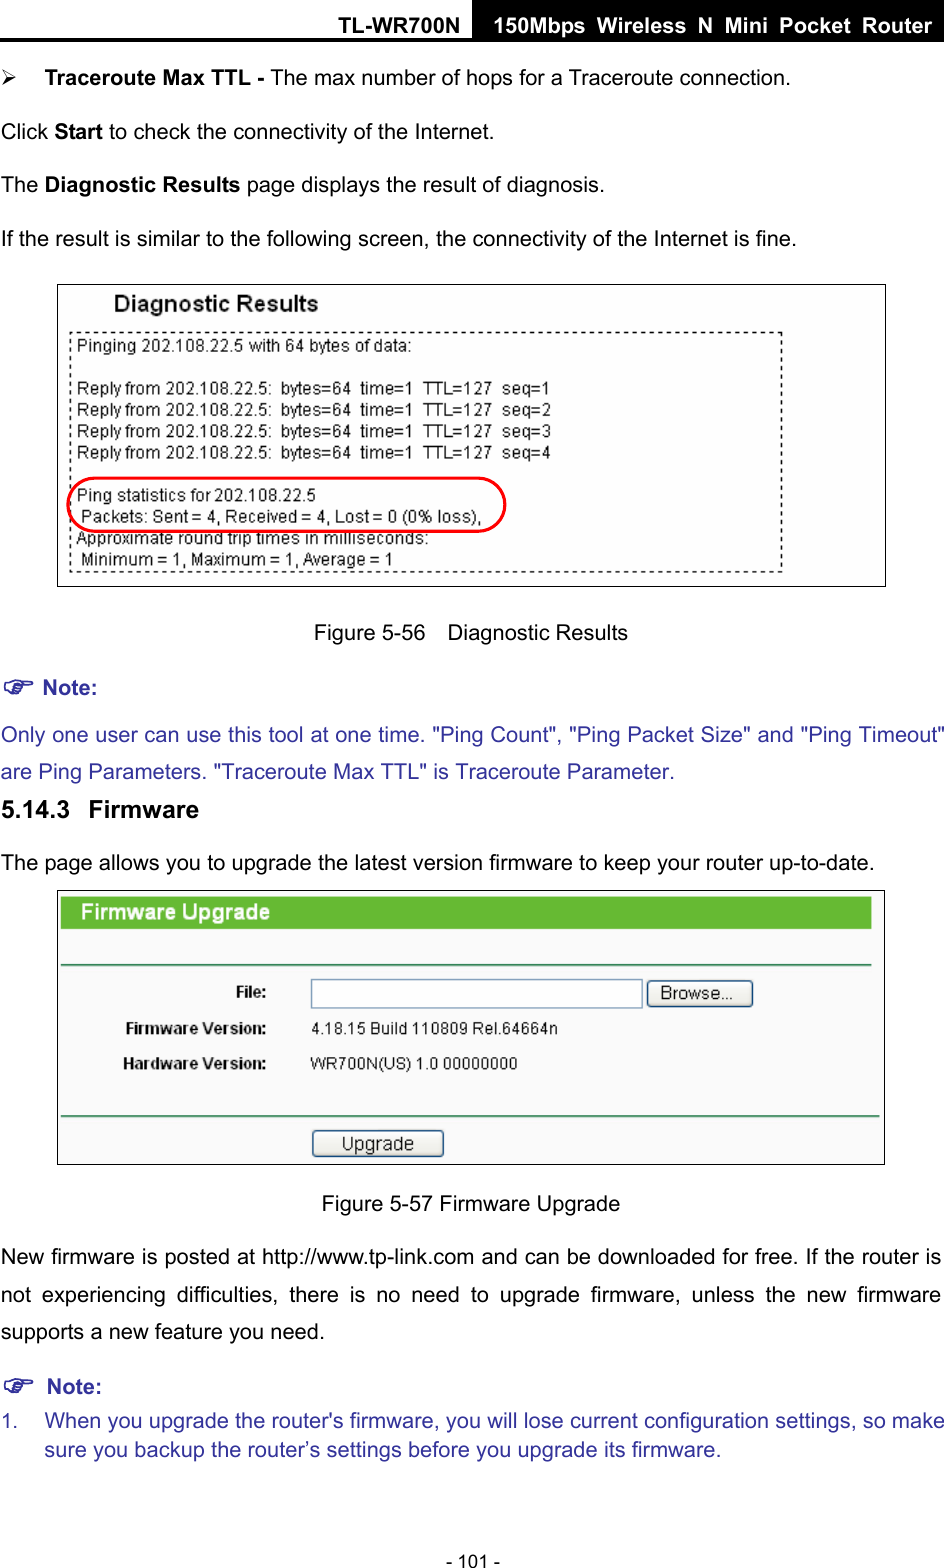 TL-WR700N 150Mbps Wireless N Mini Pocket Router - 101 - ¾ Traceroute Max TTL - The max number of hops for a Traceroute connection. Click Start to check the connectivity of the Internet.   The Diagnostic Results page displays the result of diagnosis. If the result is similar to the following screen, the connectivity of the Internet is fine.  Figure 5-56  Diagnostic Results ) Note: Only one user can use this tool at one time. &quot;Ping Count&quot;, &quot;Ping Packet Size&quot; and &quot;Ping Timeout&quot; are Ping Parameters. &quot;Traceroute Max TTL&quot; is Traceroute Parameter.   5.14.3  Firmware The page allows you to upgrade the latest version firmware to keep your router up-to-date.  Figure 5-57 Firmware Upgrade New firmware is posted at http://www.tp-link.com and can be downloaded for free. If the router is not experiencing difficulties, there is no need to upgrade firmware, unless the new firmware supports a new feature you need. ) Note: 1.  When you upgrade the router&apos;s firmware, you will lose current configuration settings, so make sure you backup the router’s settings before you upgrade its firmware.   